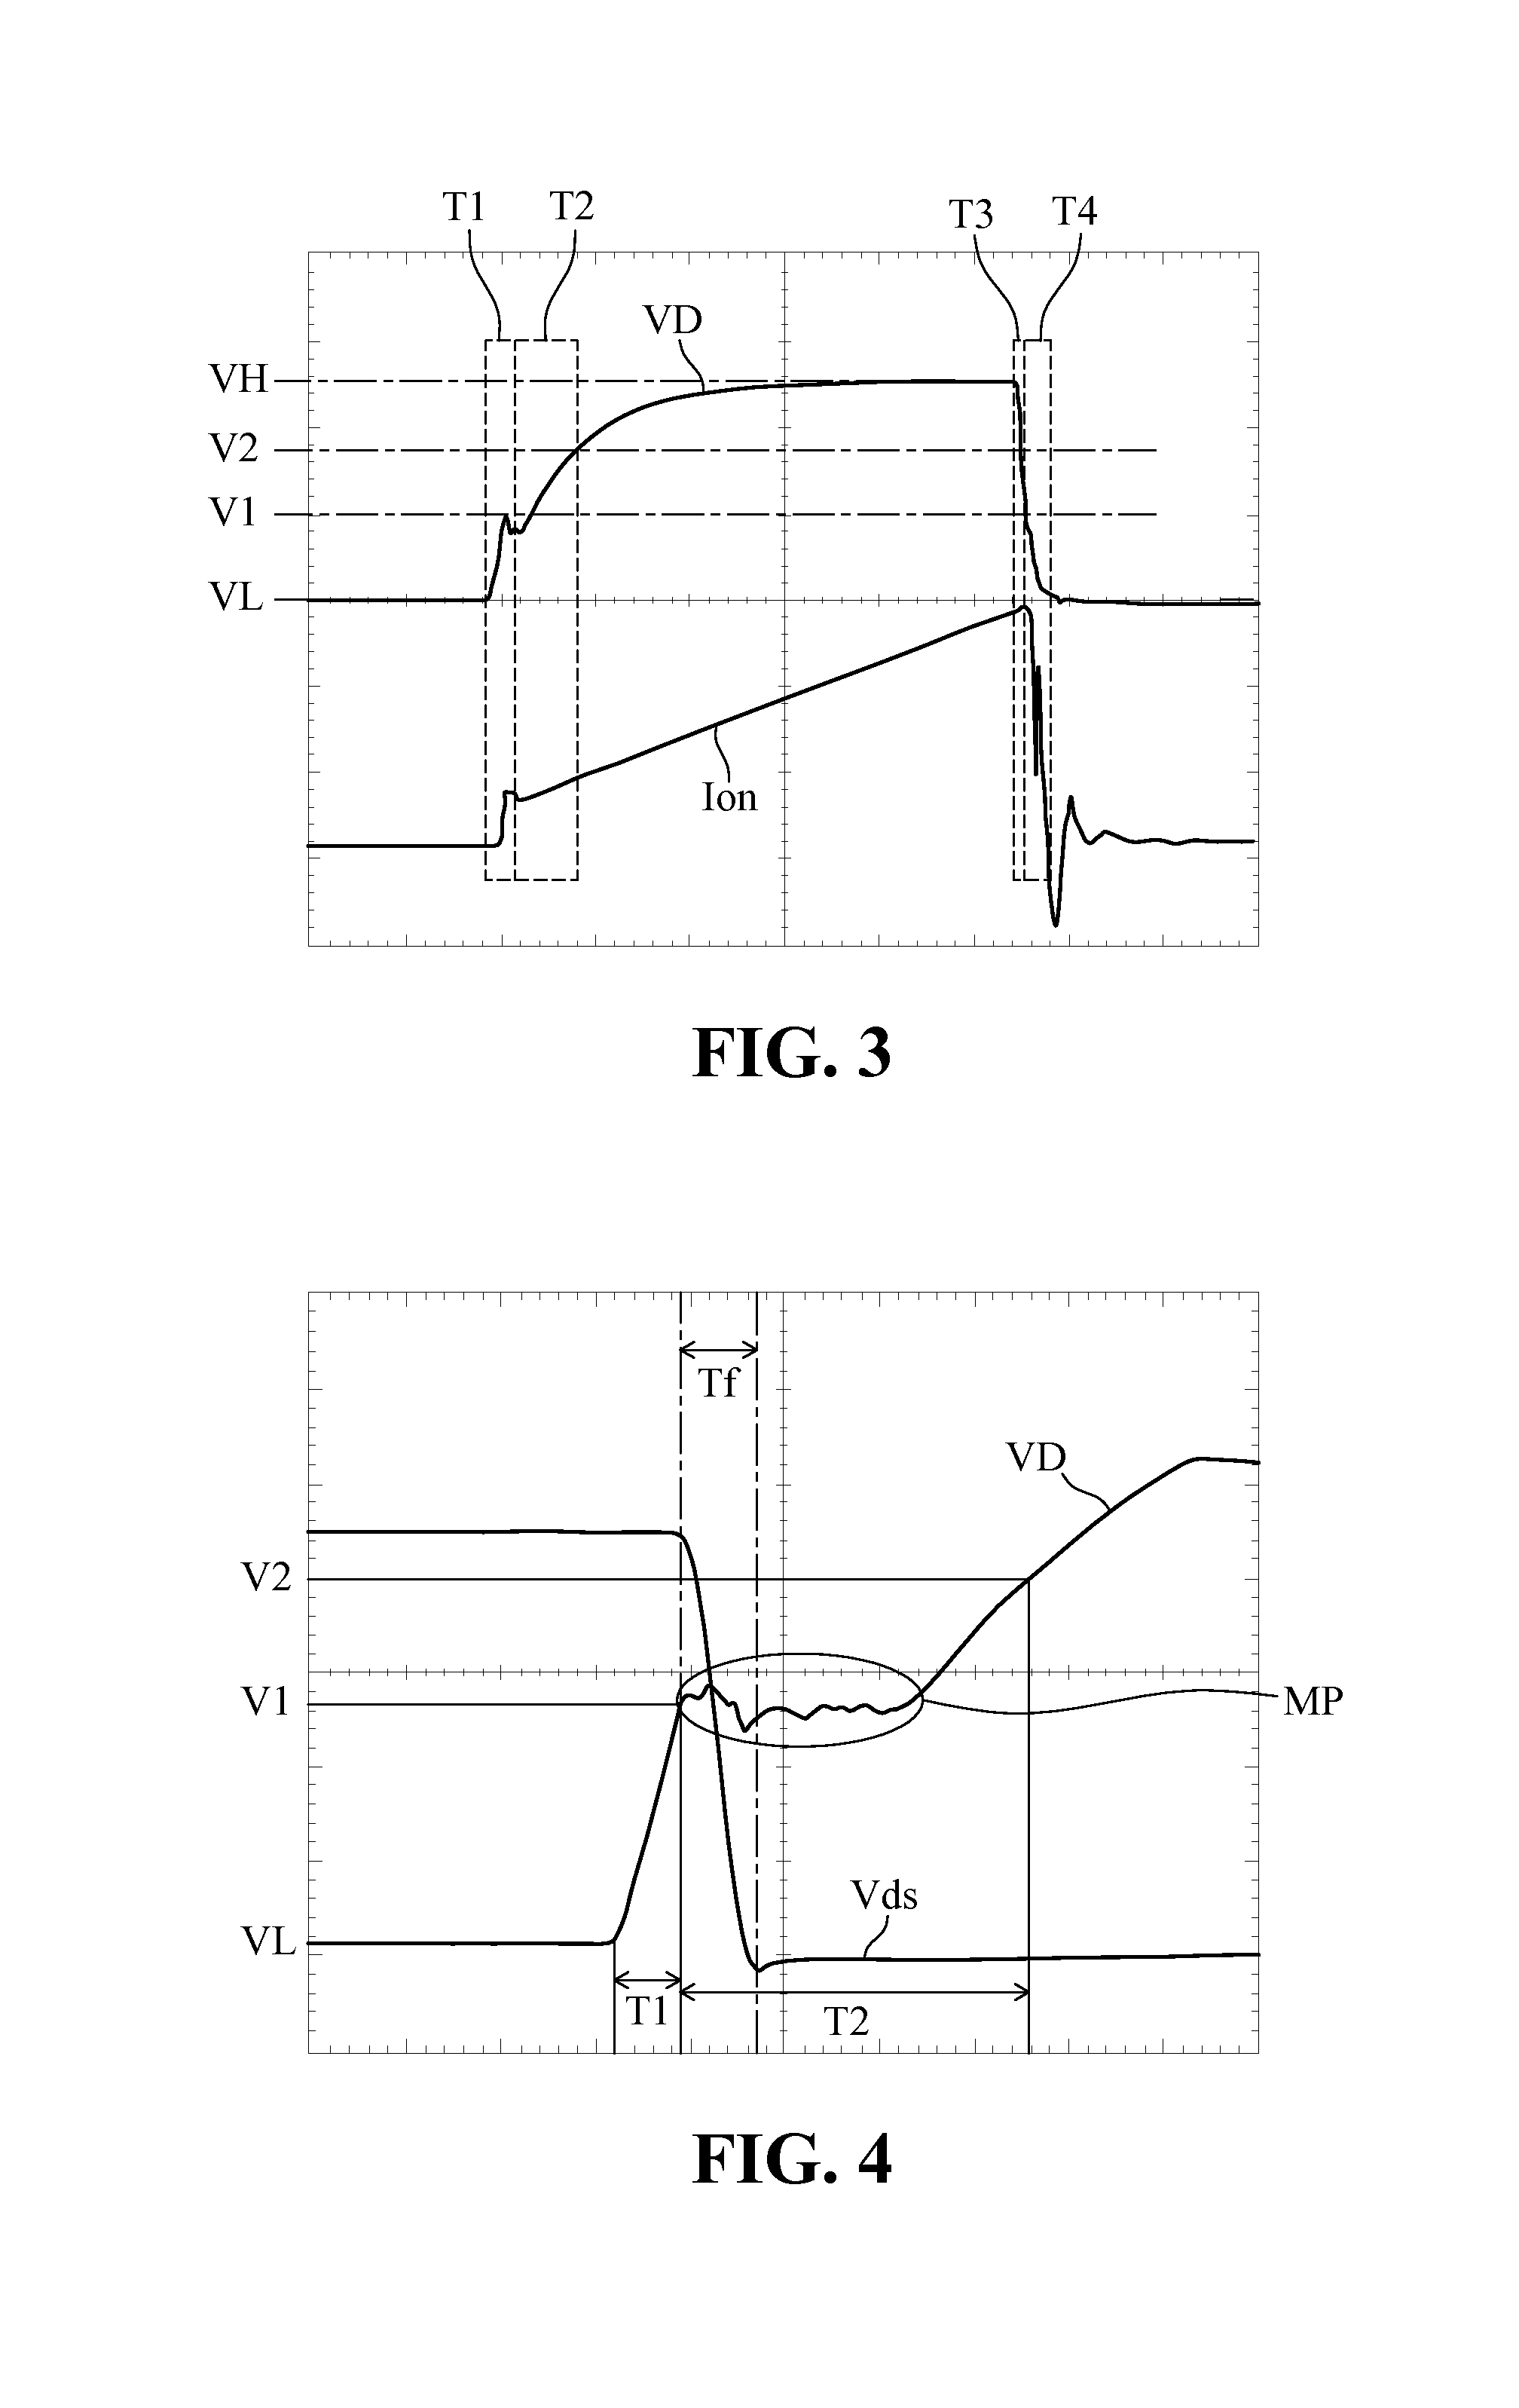 Power converting apparatus with dynamic driving adjustment